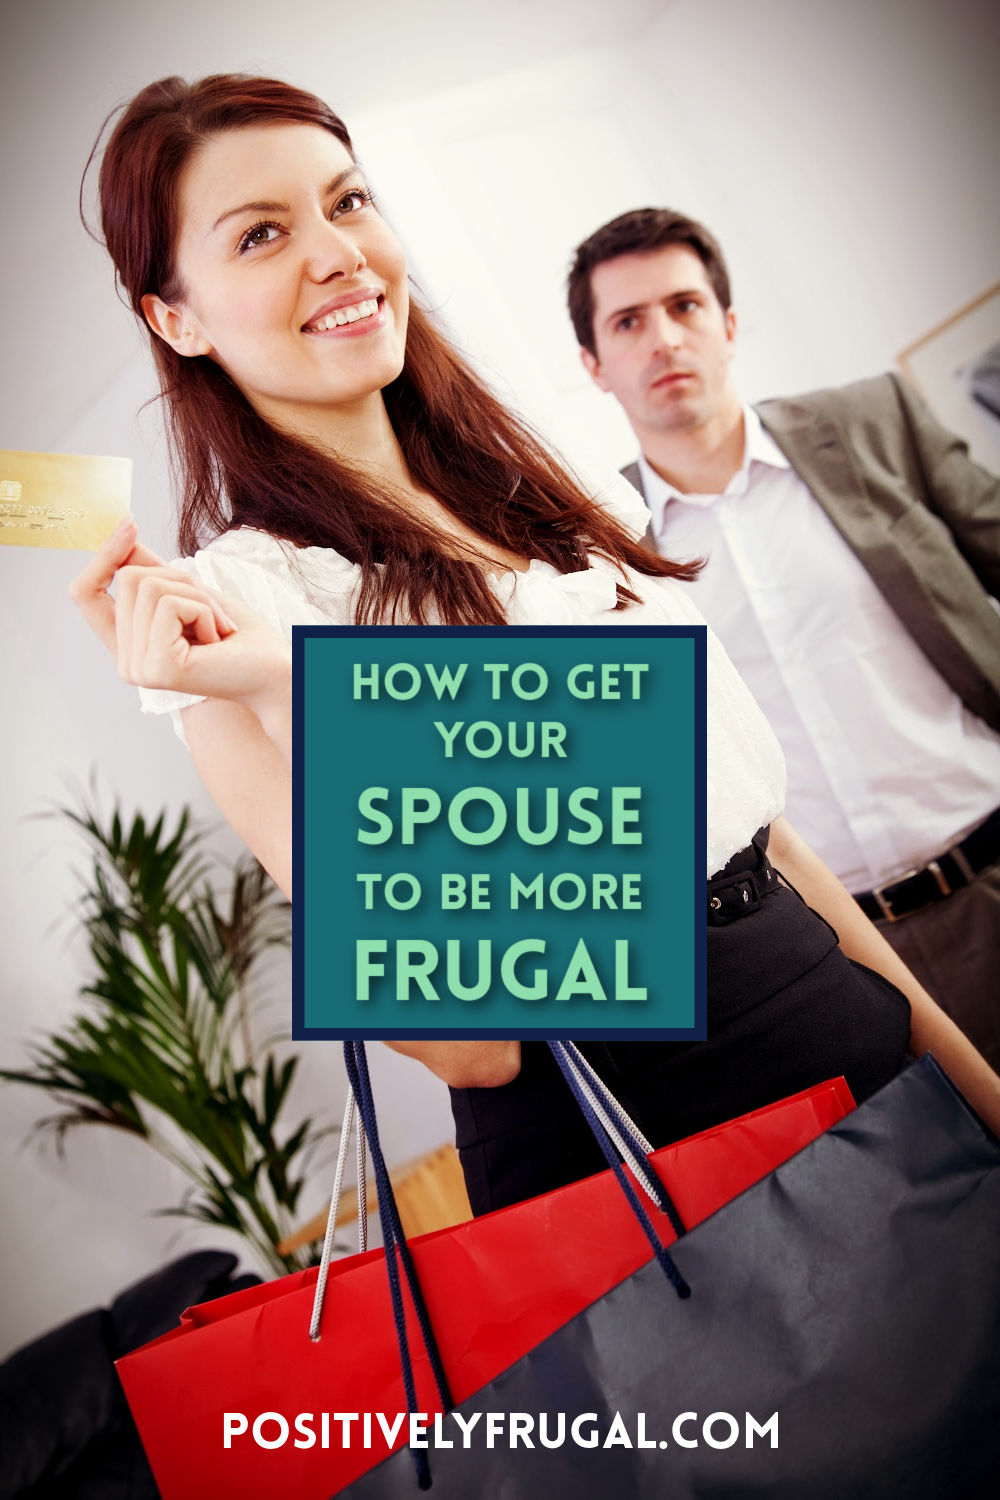 Spouse To Be More Frugal by PositivelyFrugal.com